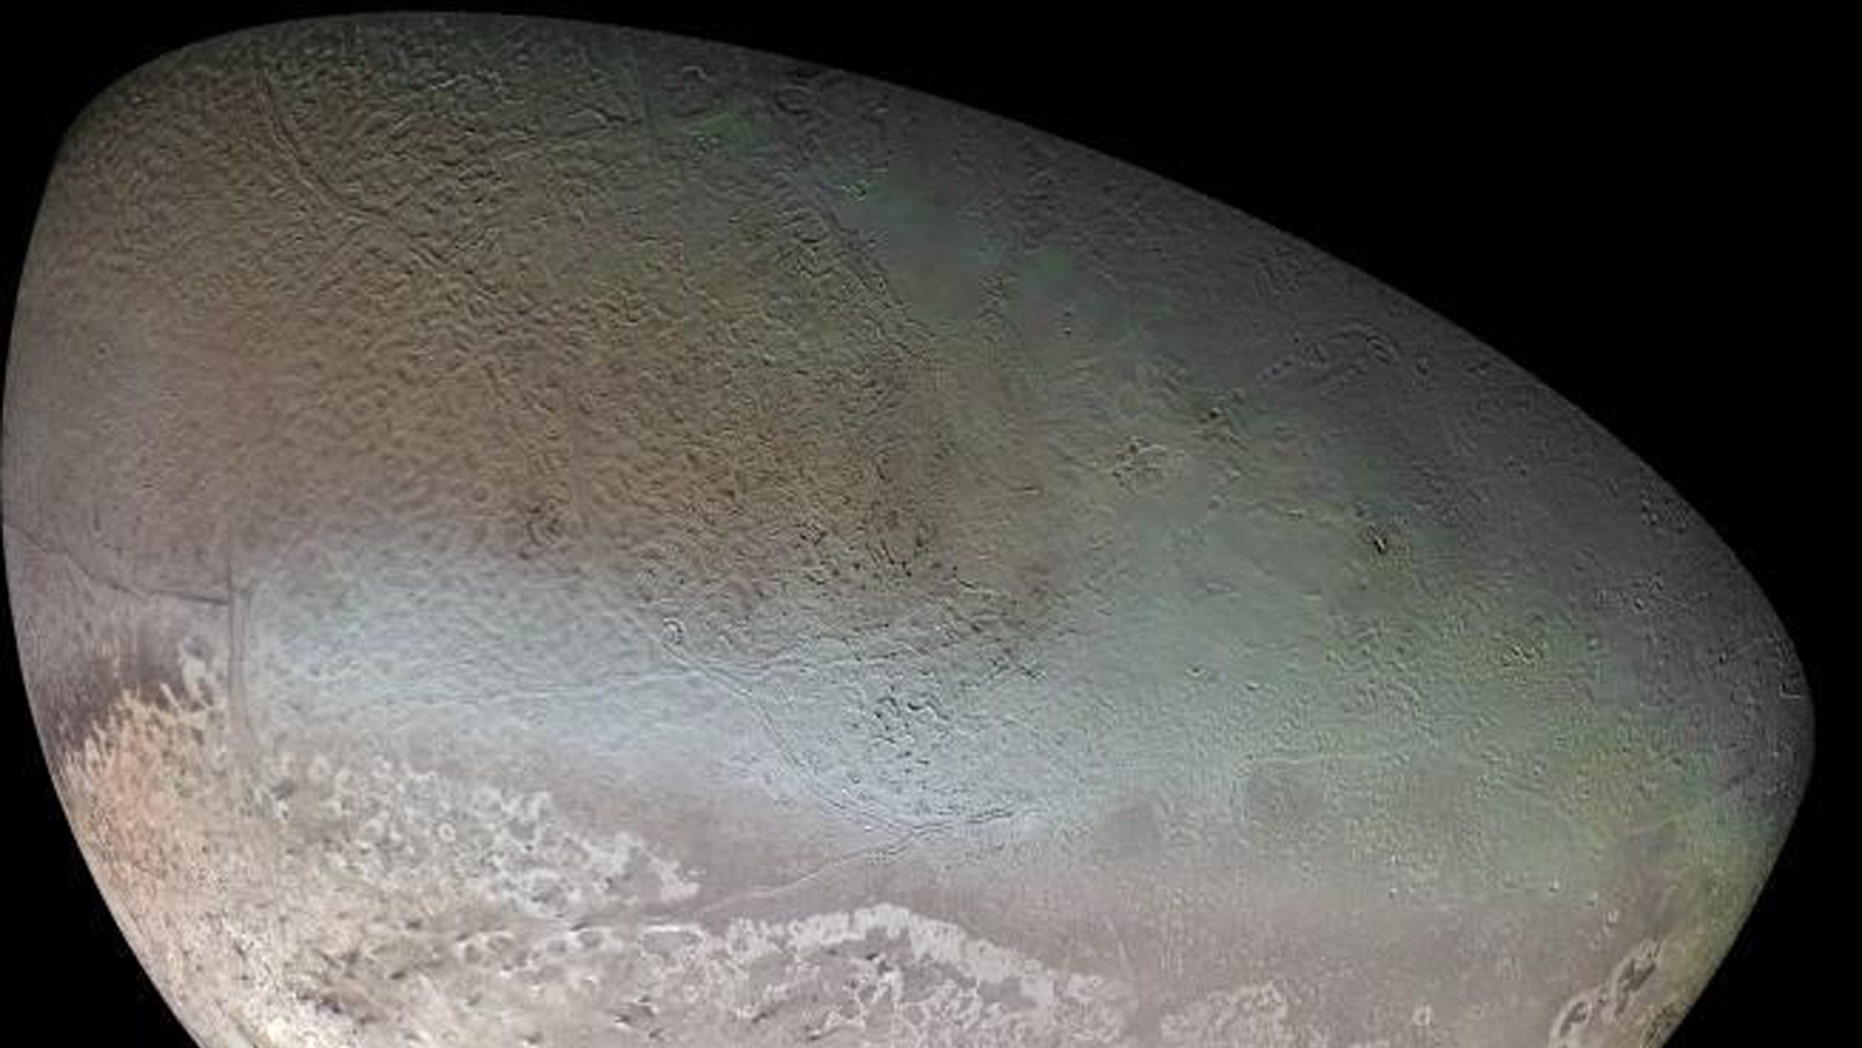 Global color mosaic of Triton, taken in 1989 by Voyager 2 during its flyby of the Neptune system. (Credit: NASA/JPL/USGS)